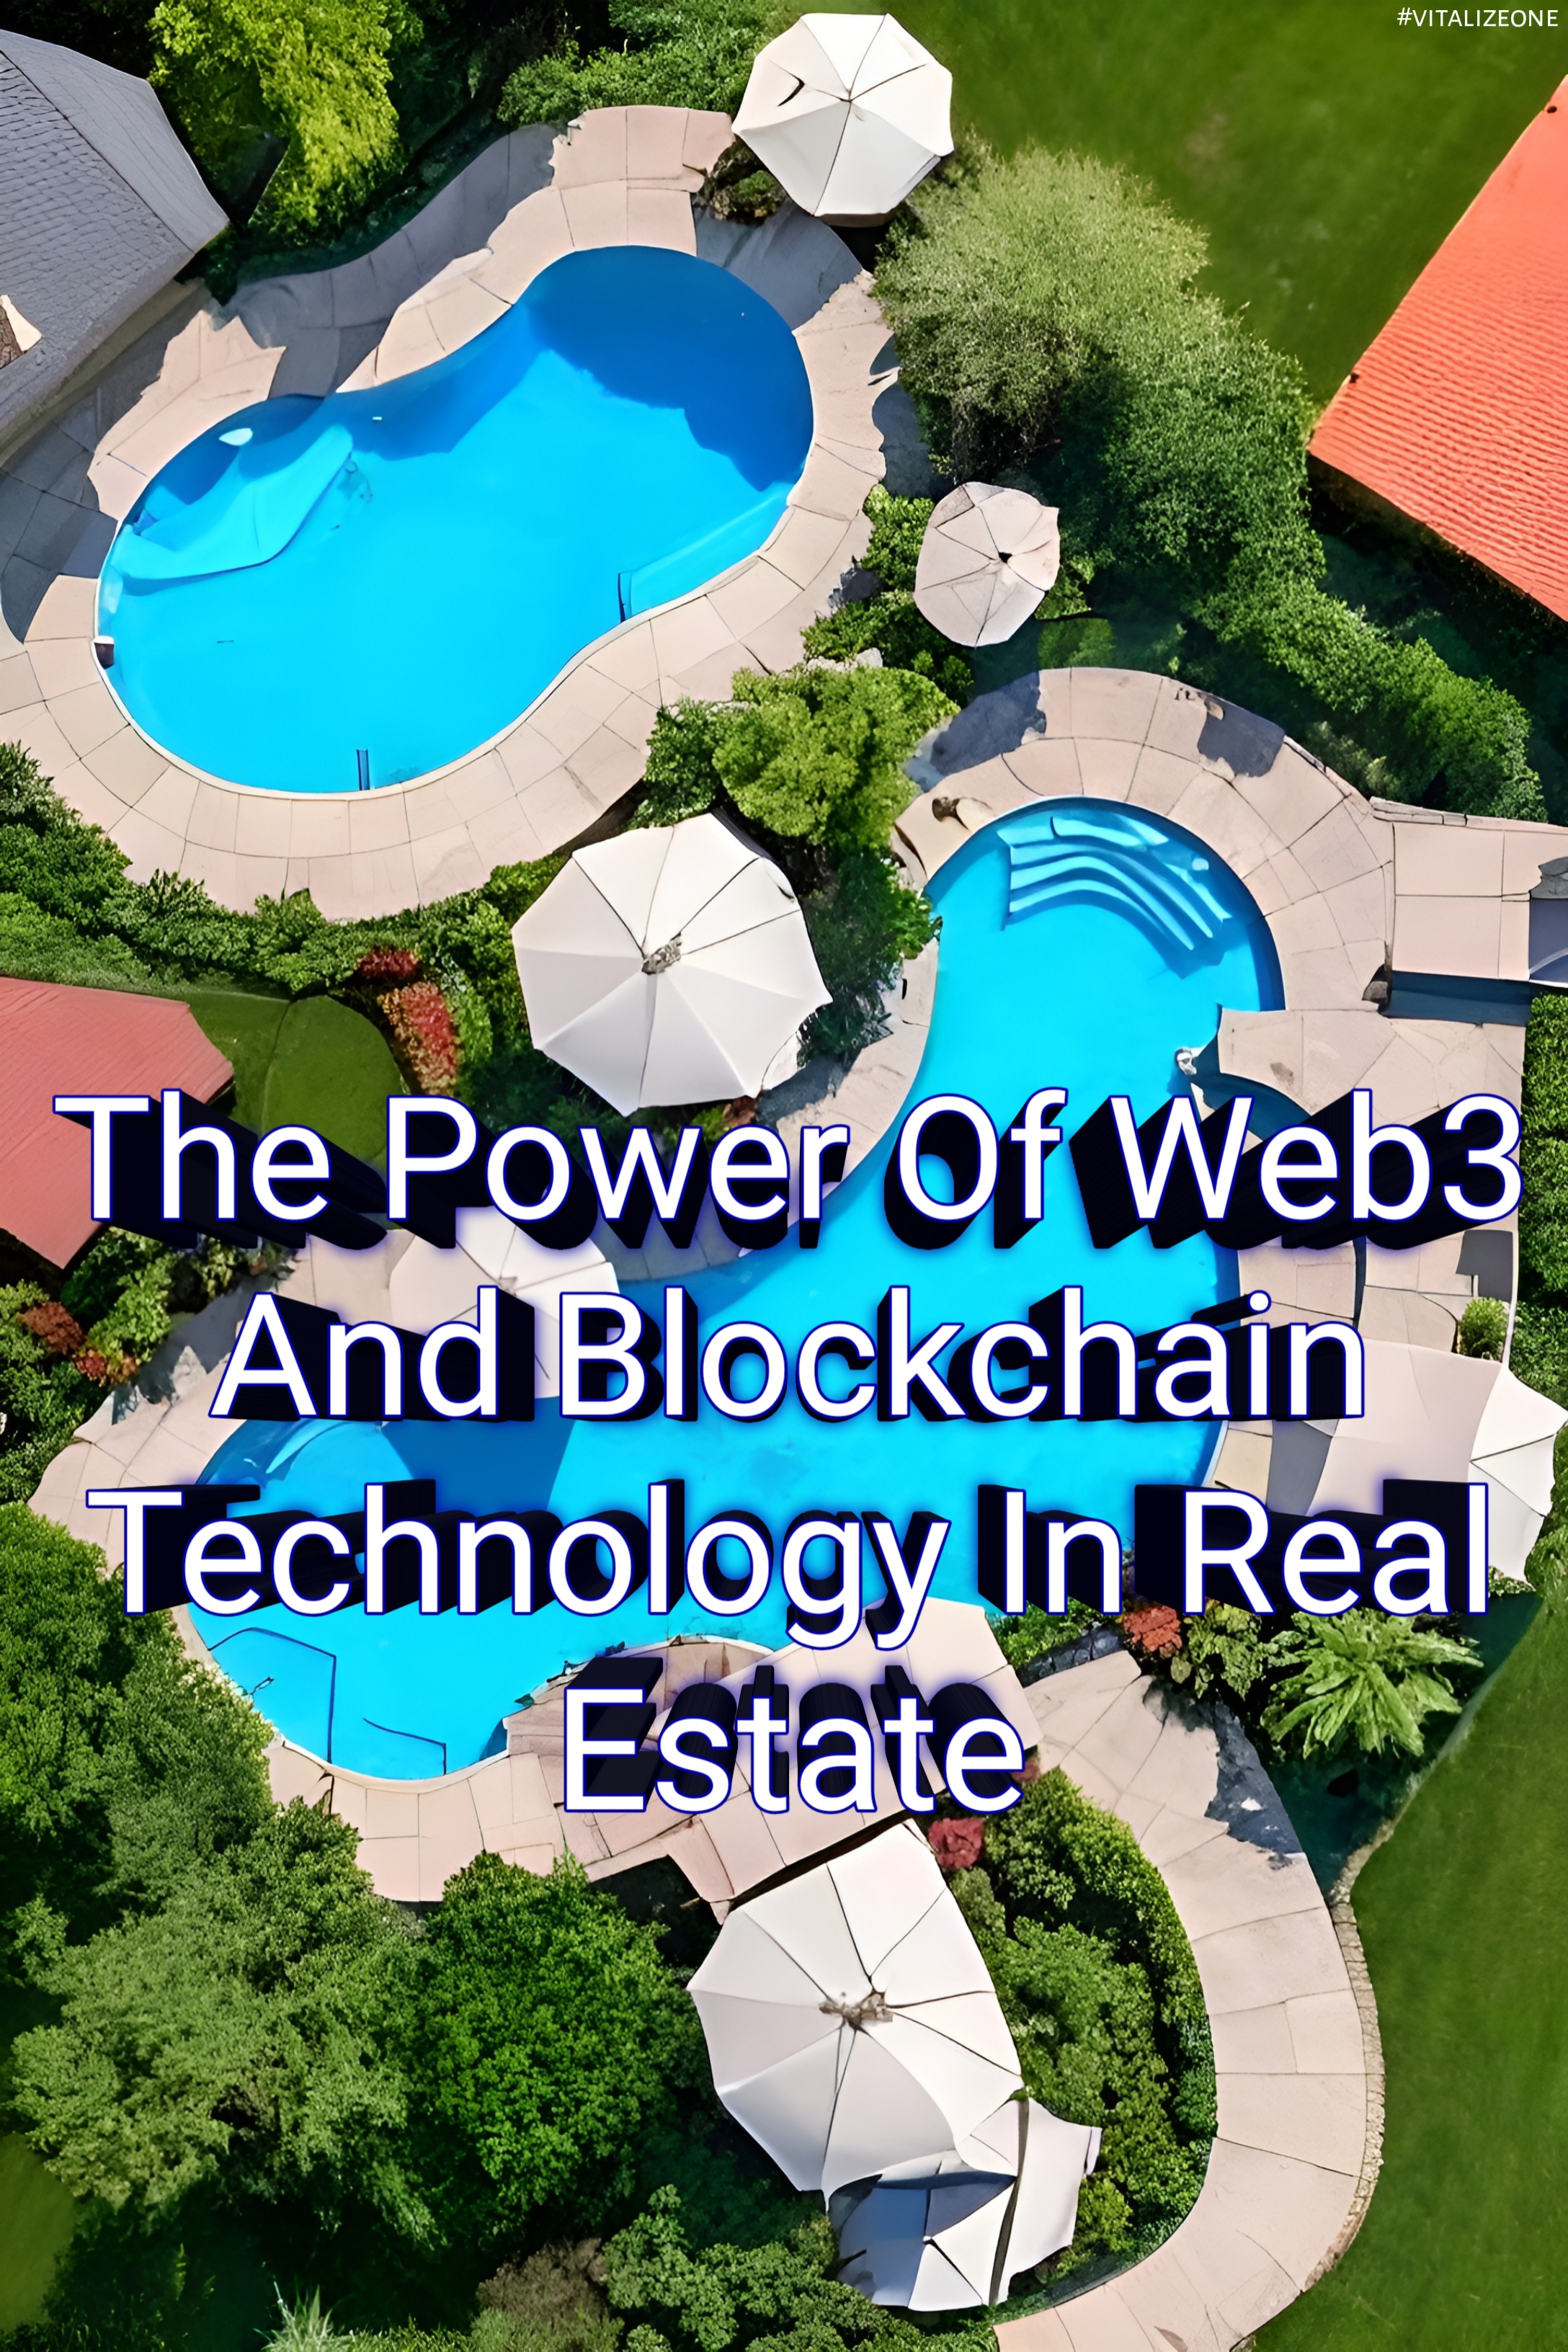 The Power of Web3 and Blockchain Technology in Real Estate | VitalyTennant.com | #vitalizeone 2